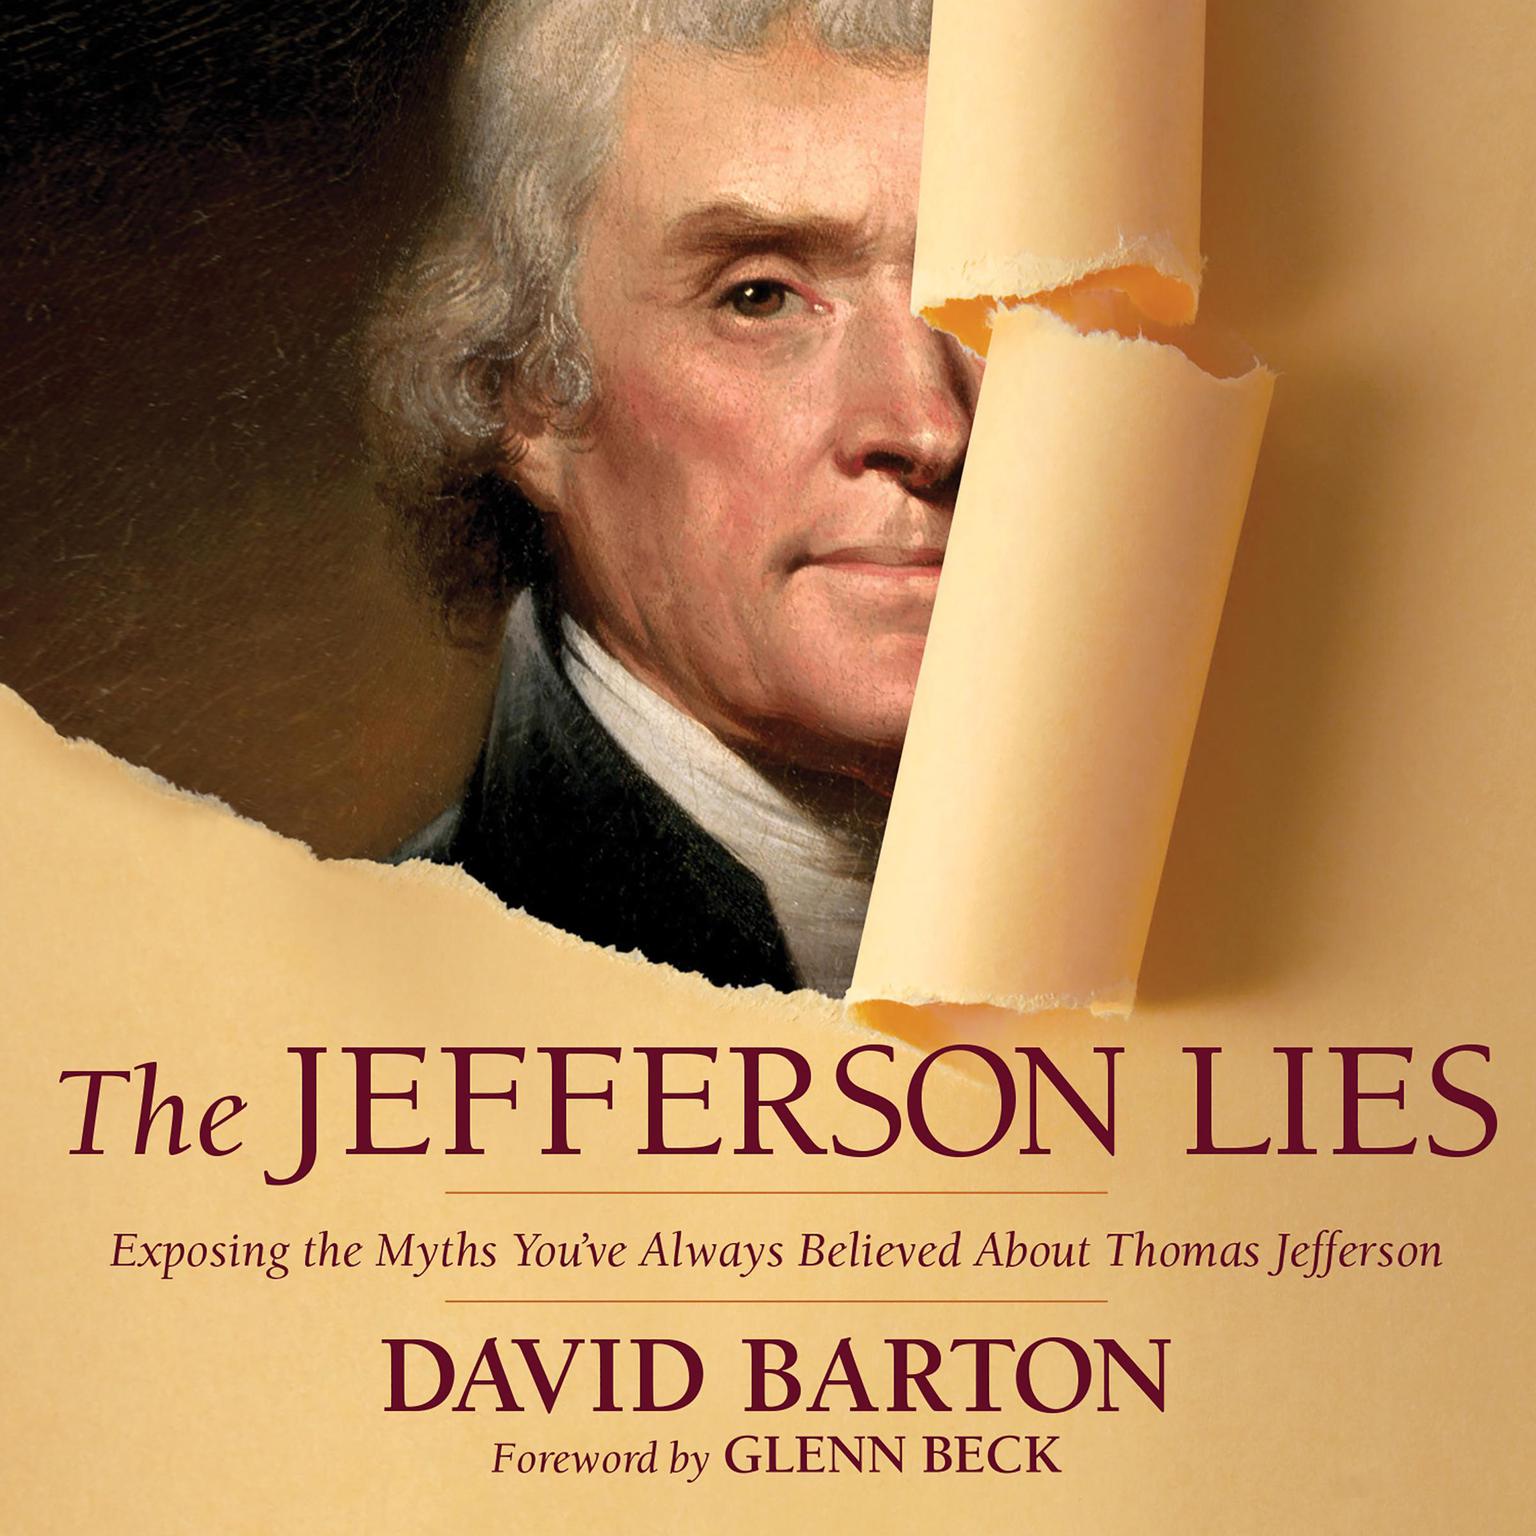 The Jefferson Lies: Exposing the Myths Youve Always Believed About Thomas Jefferson Audiobook, by David Barton